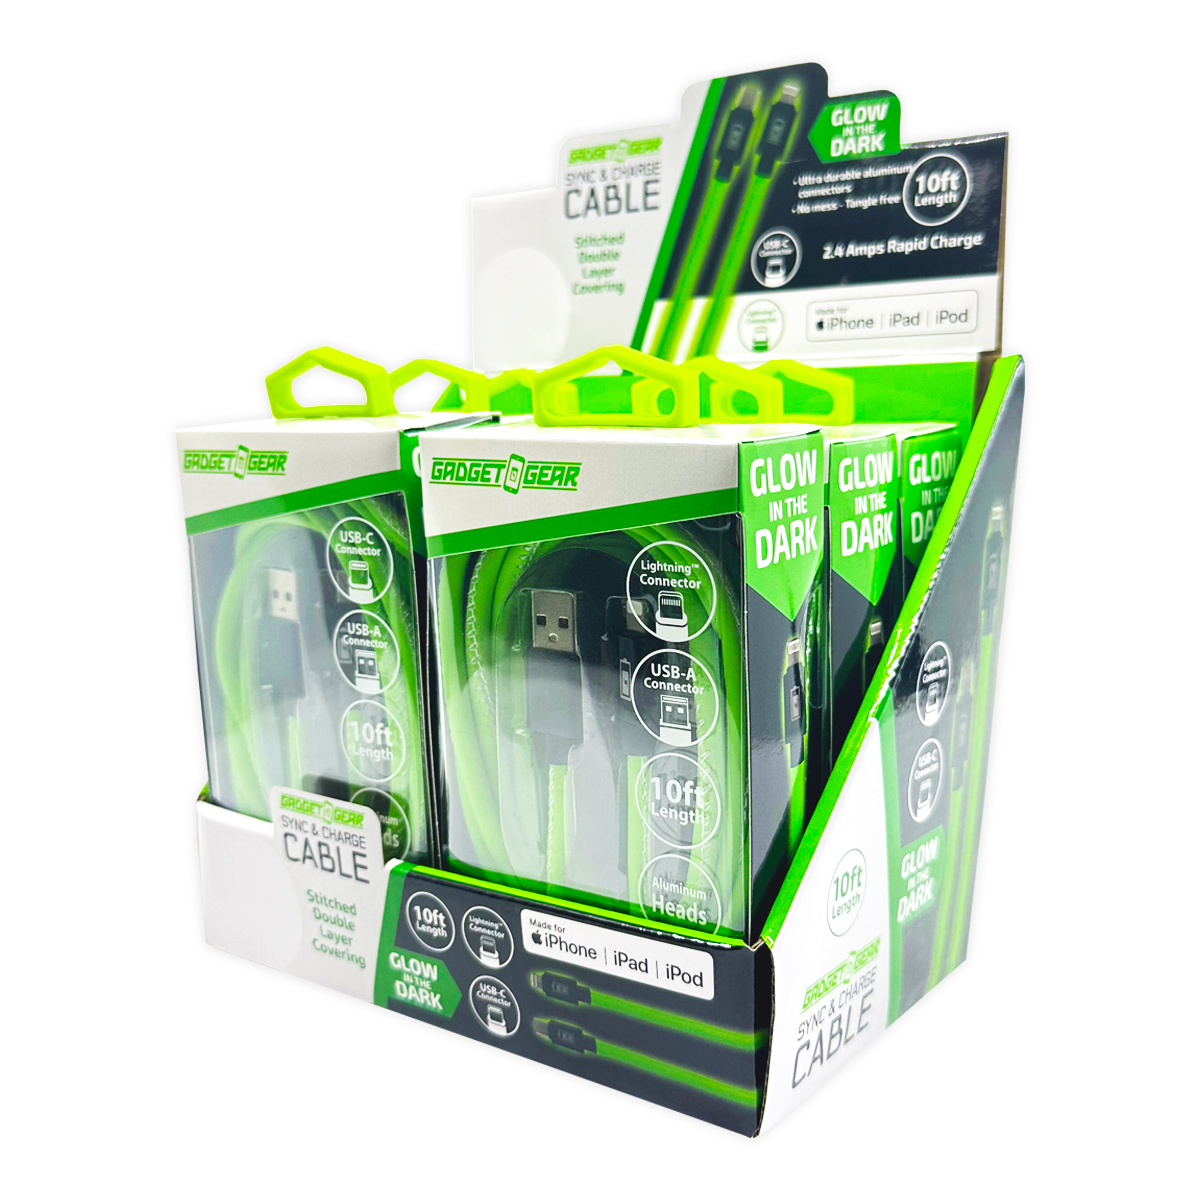 Charging Cable Glow In The Dark Assortment 10FT - 6 Pieces Per Retail Ready Display 25113